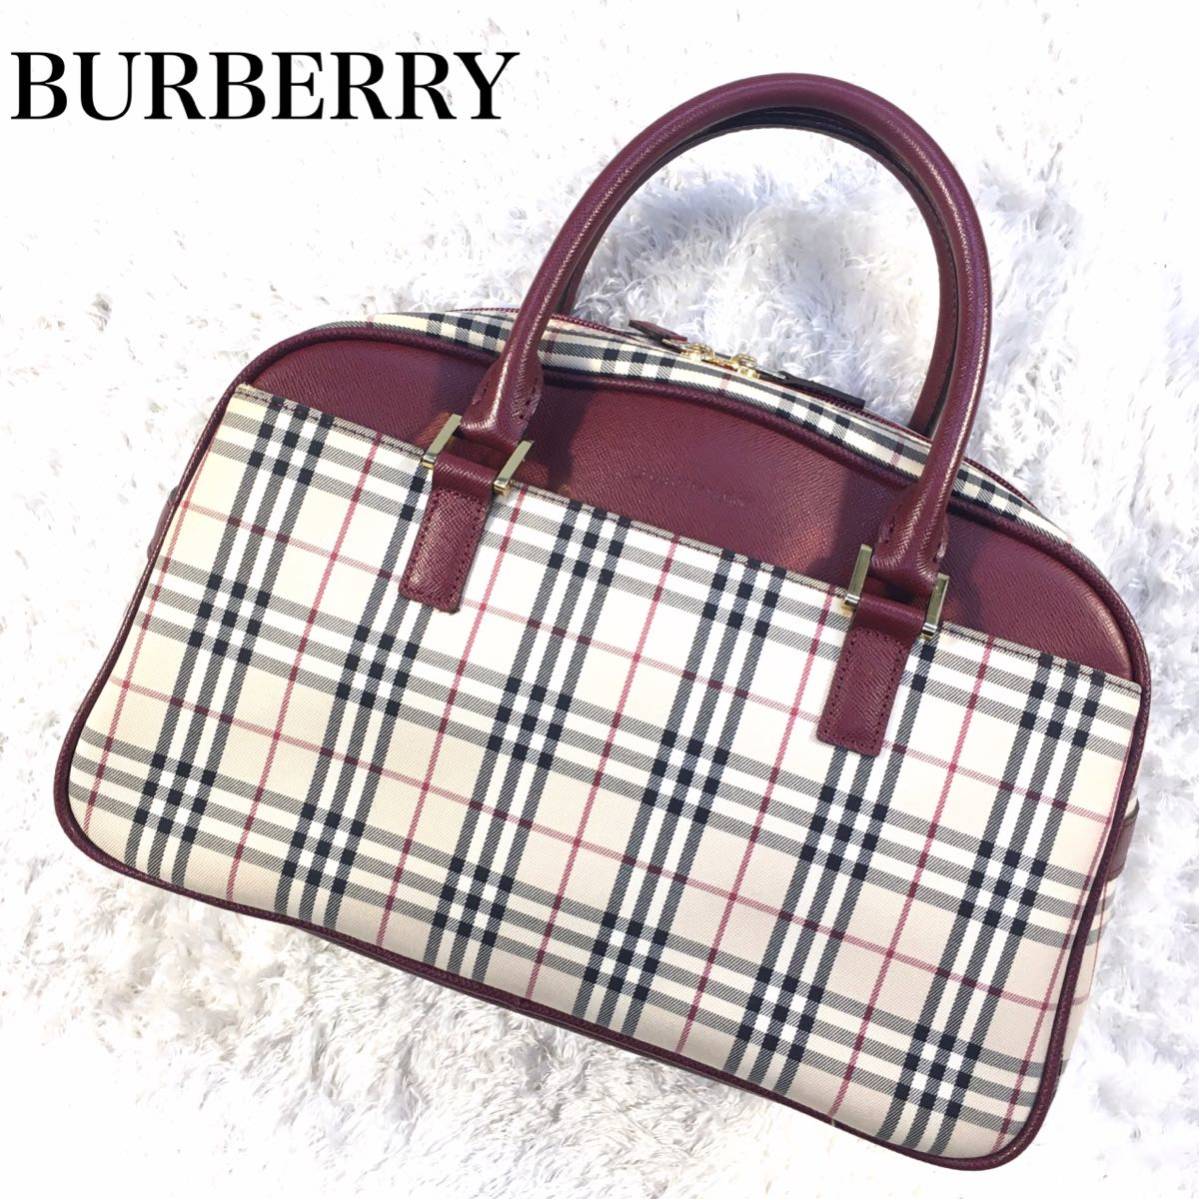 BURBERRY Burberry Boston bag nylon canvas leather leather handle Dolce k metal fittings Gold 